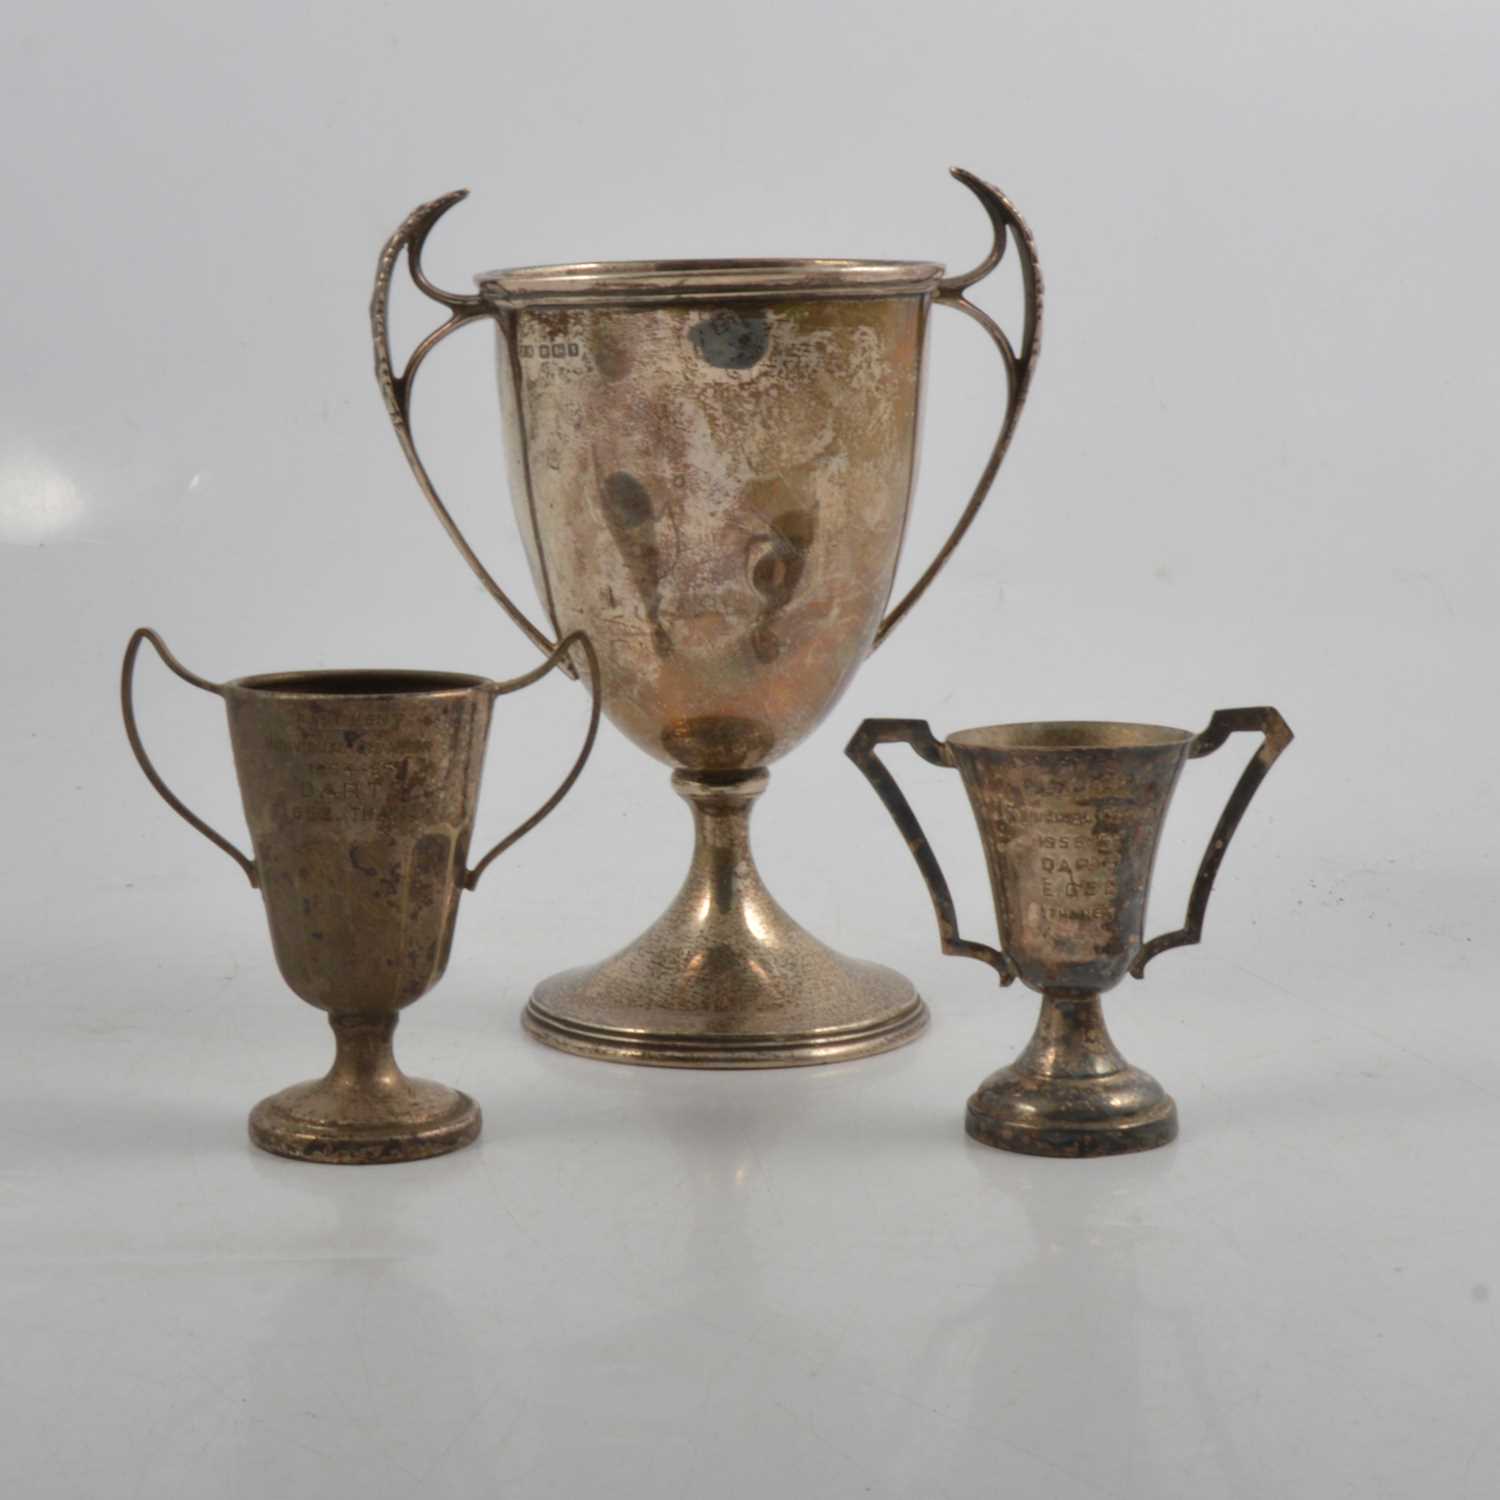 Lot 243 - Silver two-handled trophy cup, Stevenson & Law, Sheffield 1917, and two small plated trophy cups.